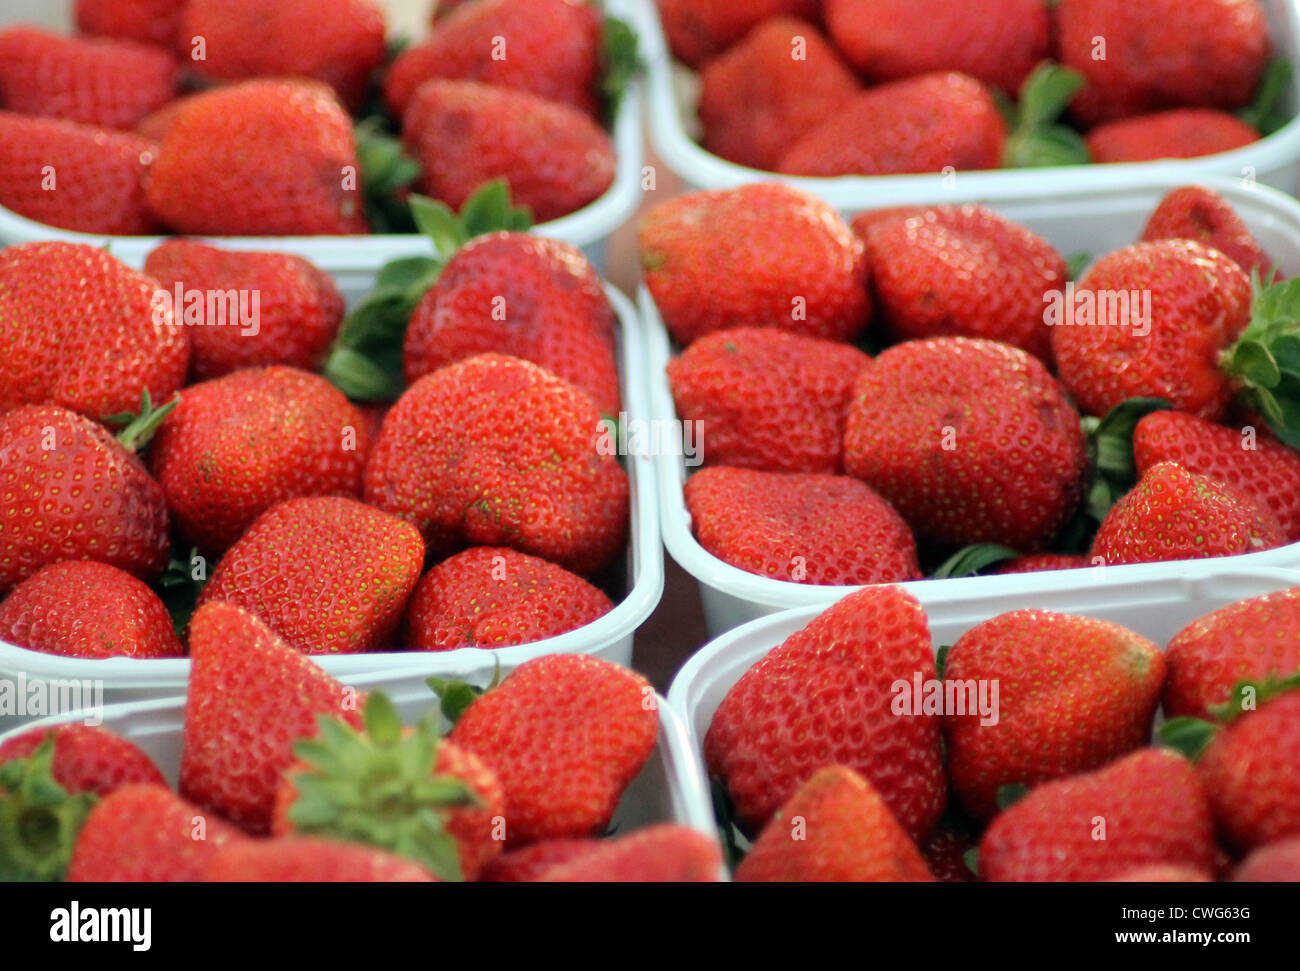 Punnets of ripe red strawberries on market stall. Stock Photo